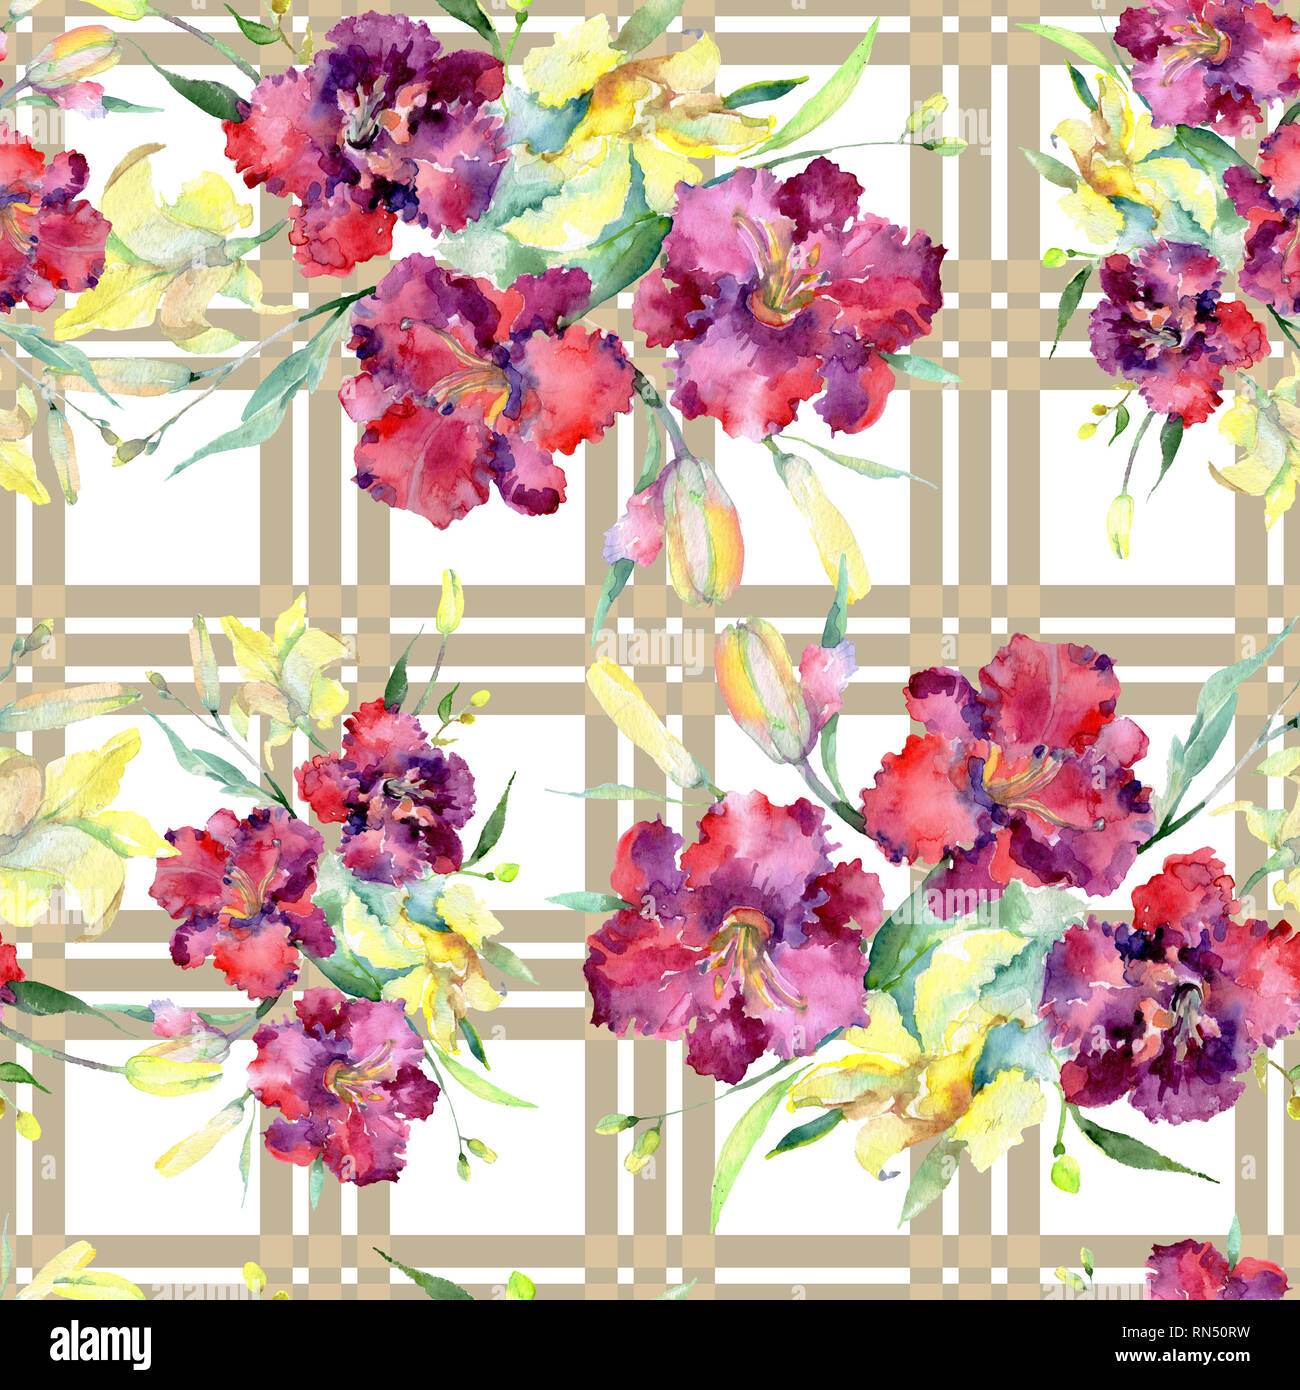 Bouquet of yellow and maroon lilies flower. Watercolor background illustration set. Seamless background pattern. Stock Photo